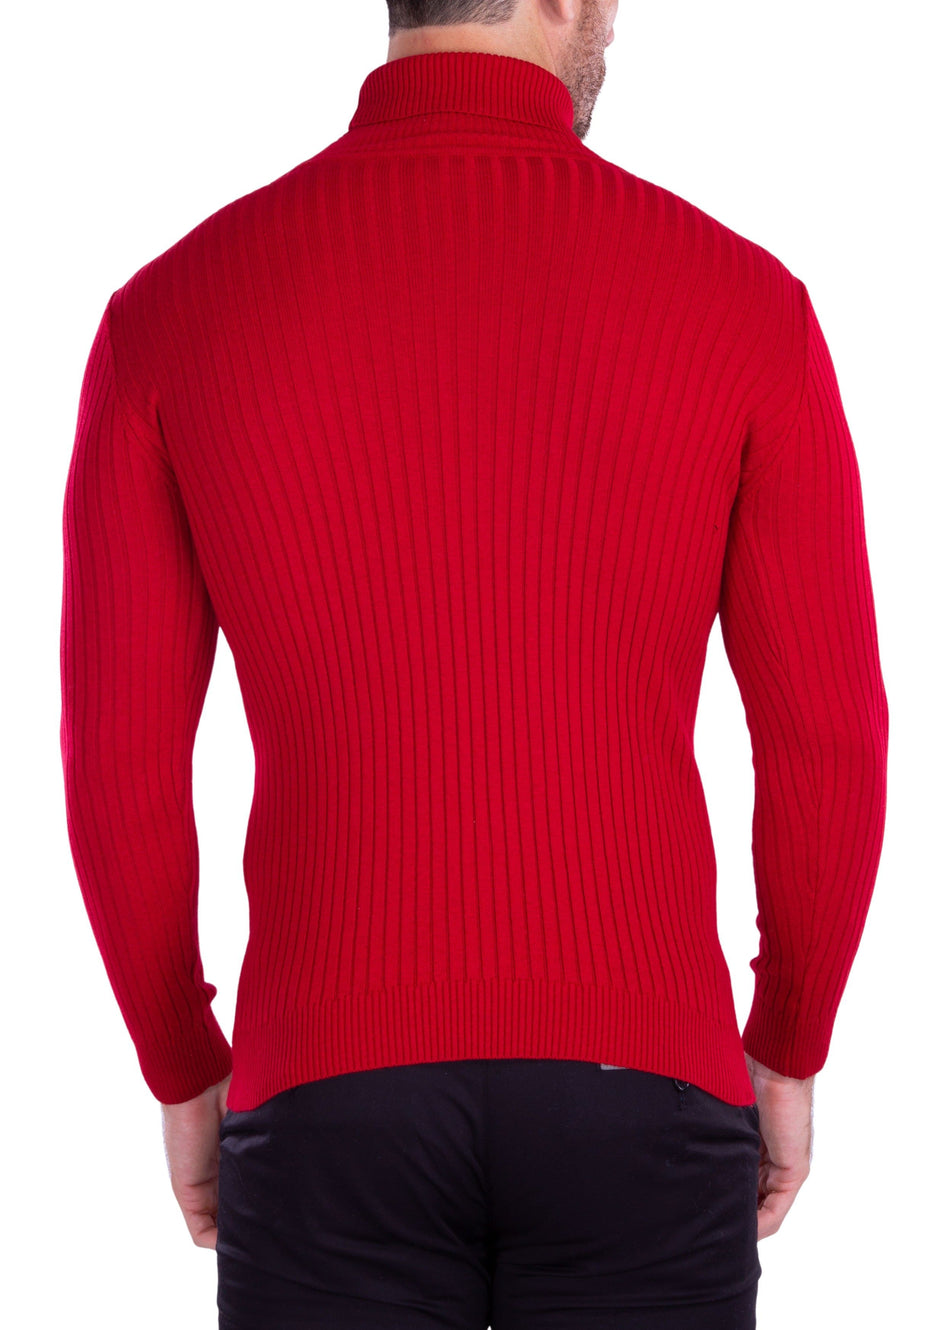 215101 - Red Ribbed Turtleneck Sweater